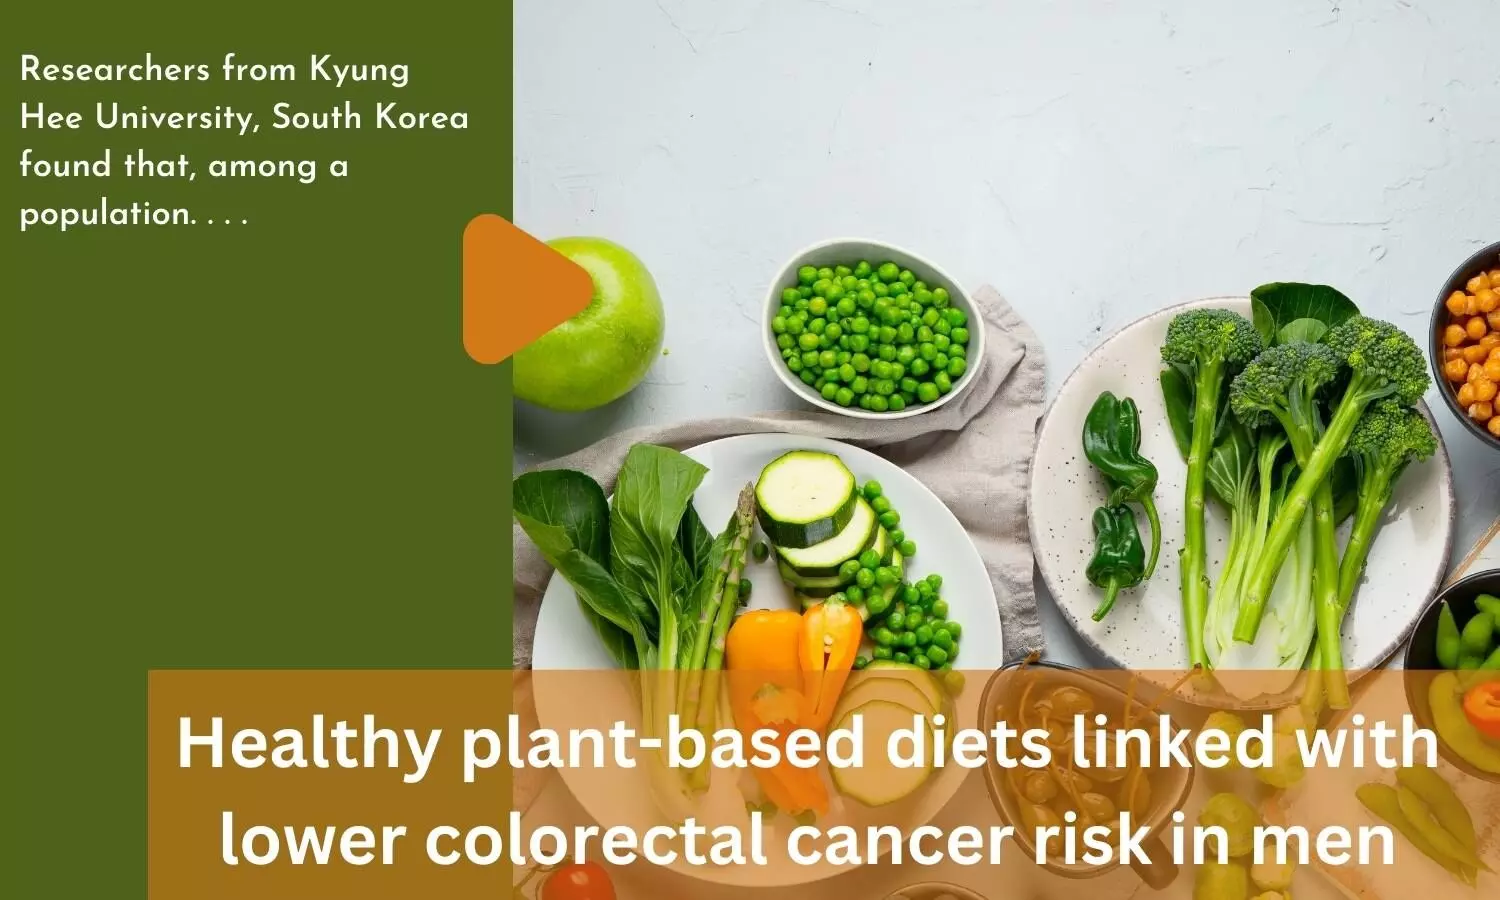 Healthy plant-based diets linked with lower colorectal cancer risk in men